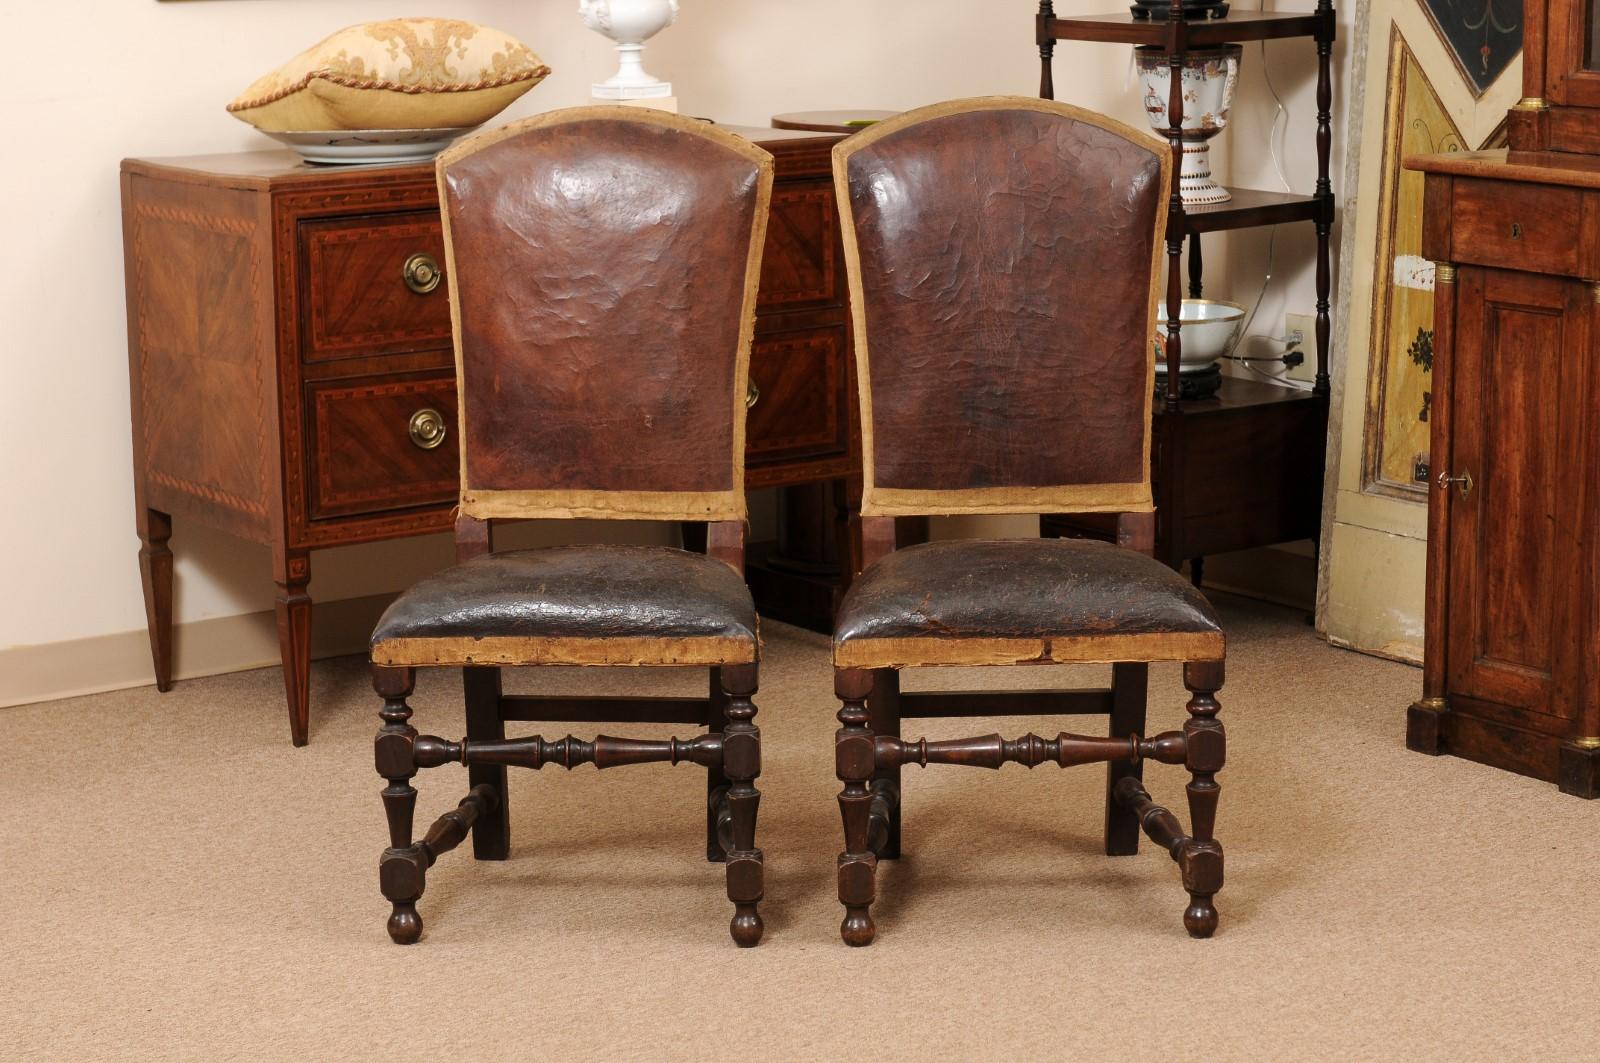 Pair of Large 18th Century Italian Walnut Hall Chairs with Leather Upholstery  For Sale 8